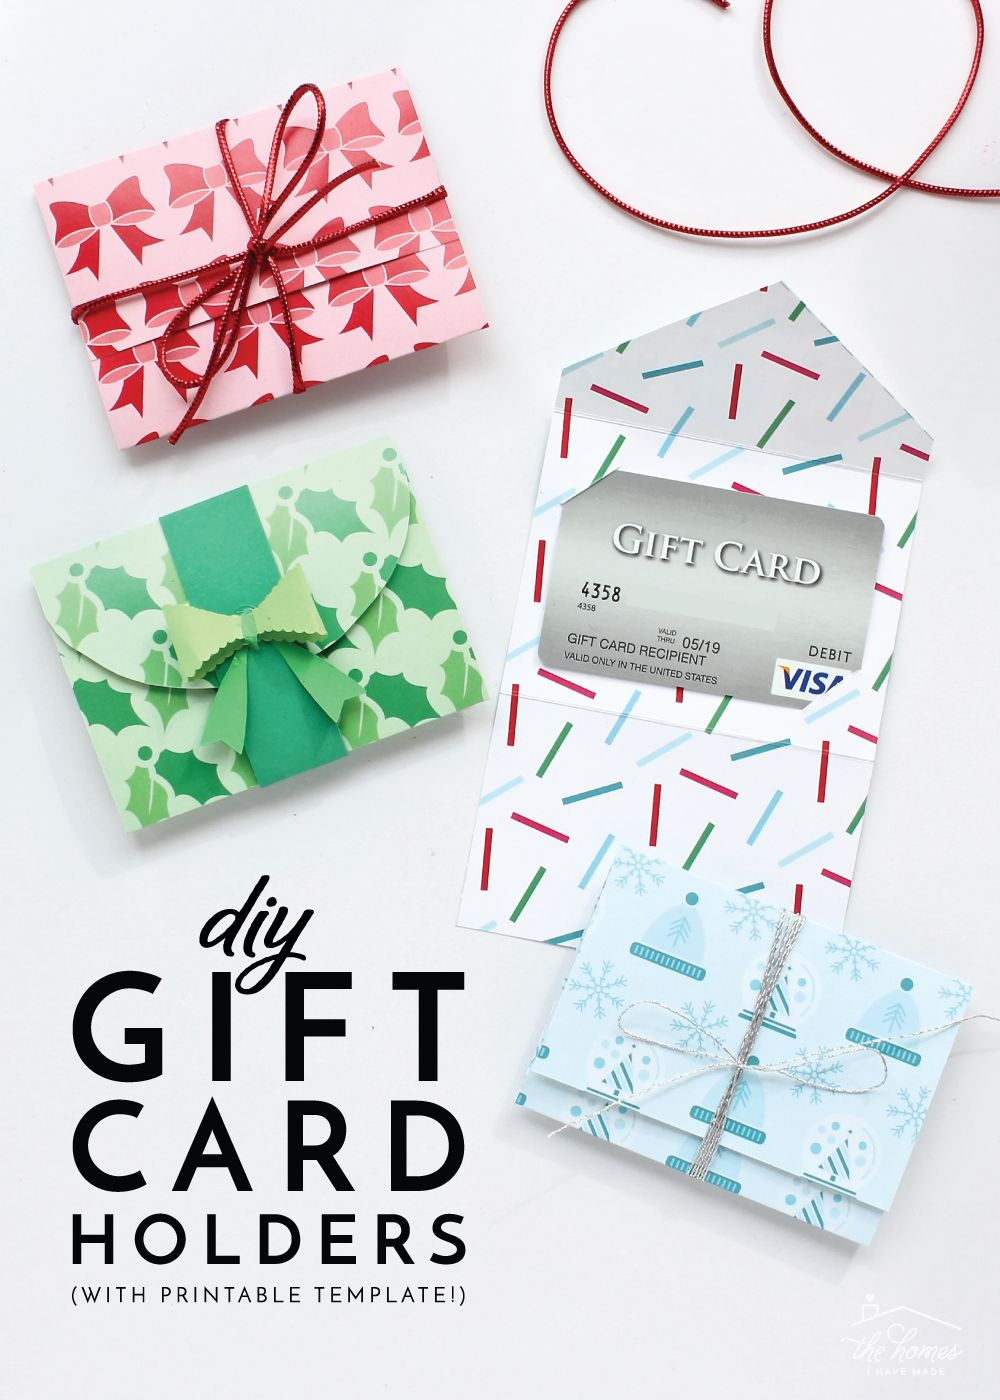 Diy Gift Card Holders (With Printable Template!) | Gift Card Inside Present Card Template